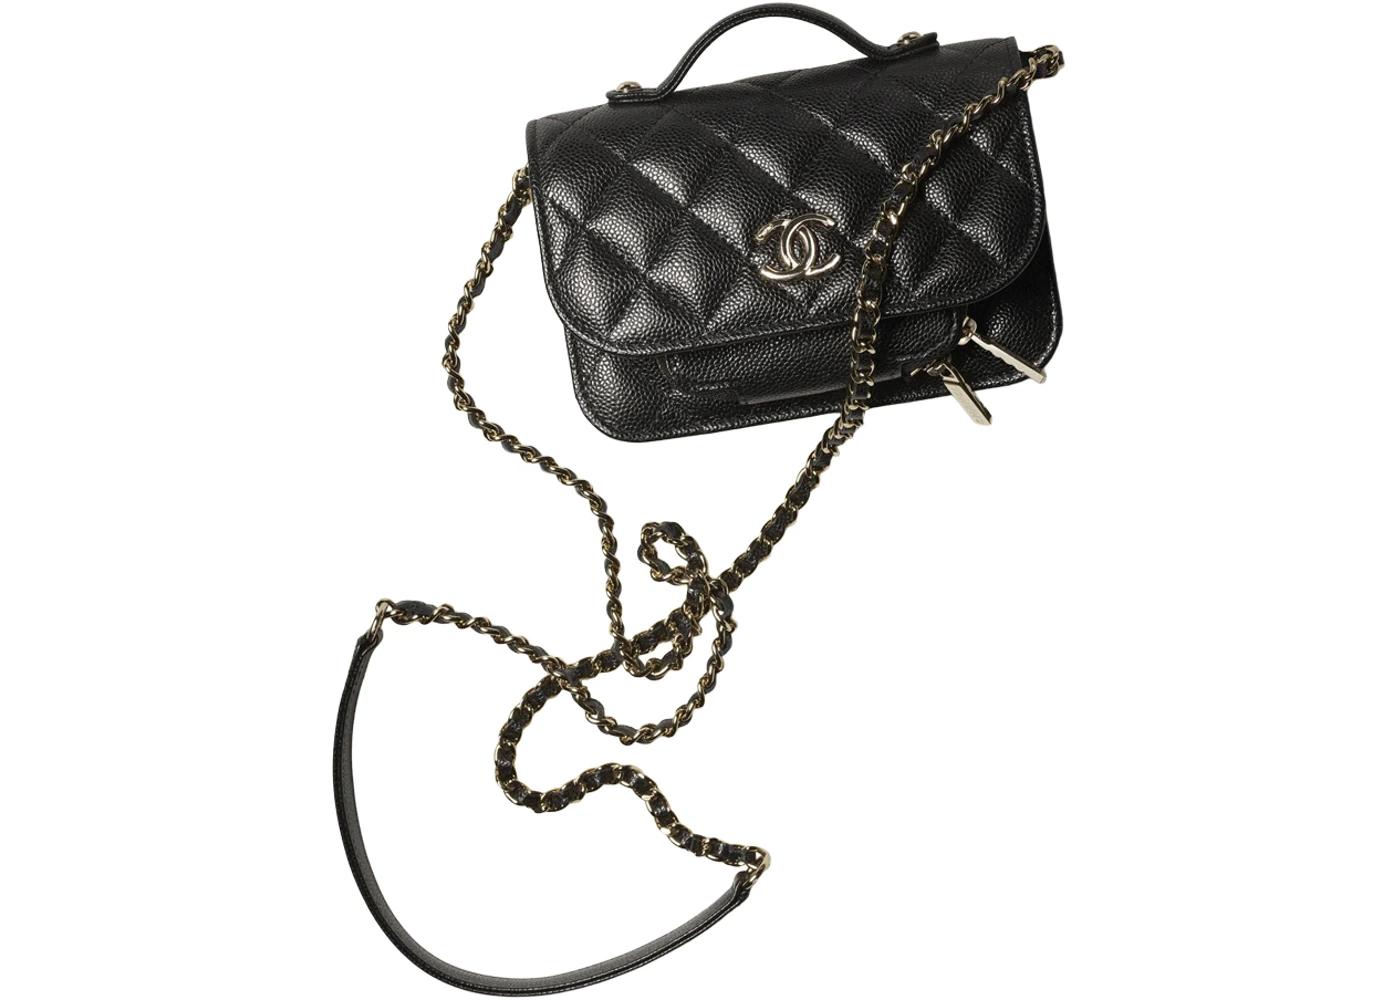 Clutch With Chain AP2914 Black by CHANEL